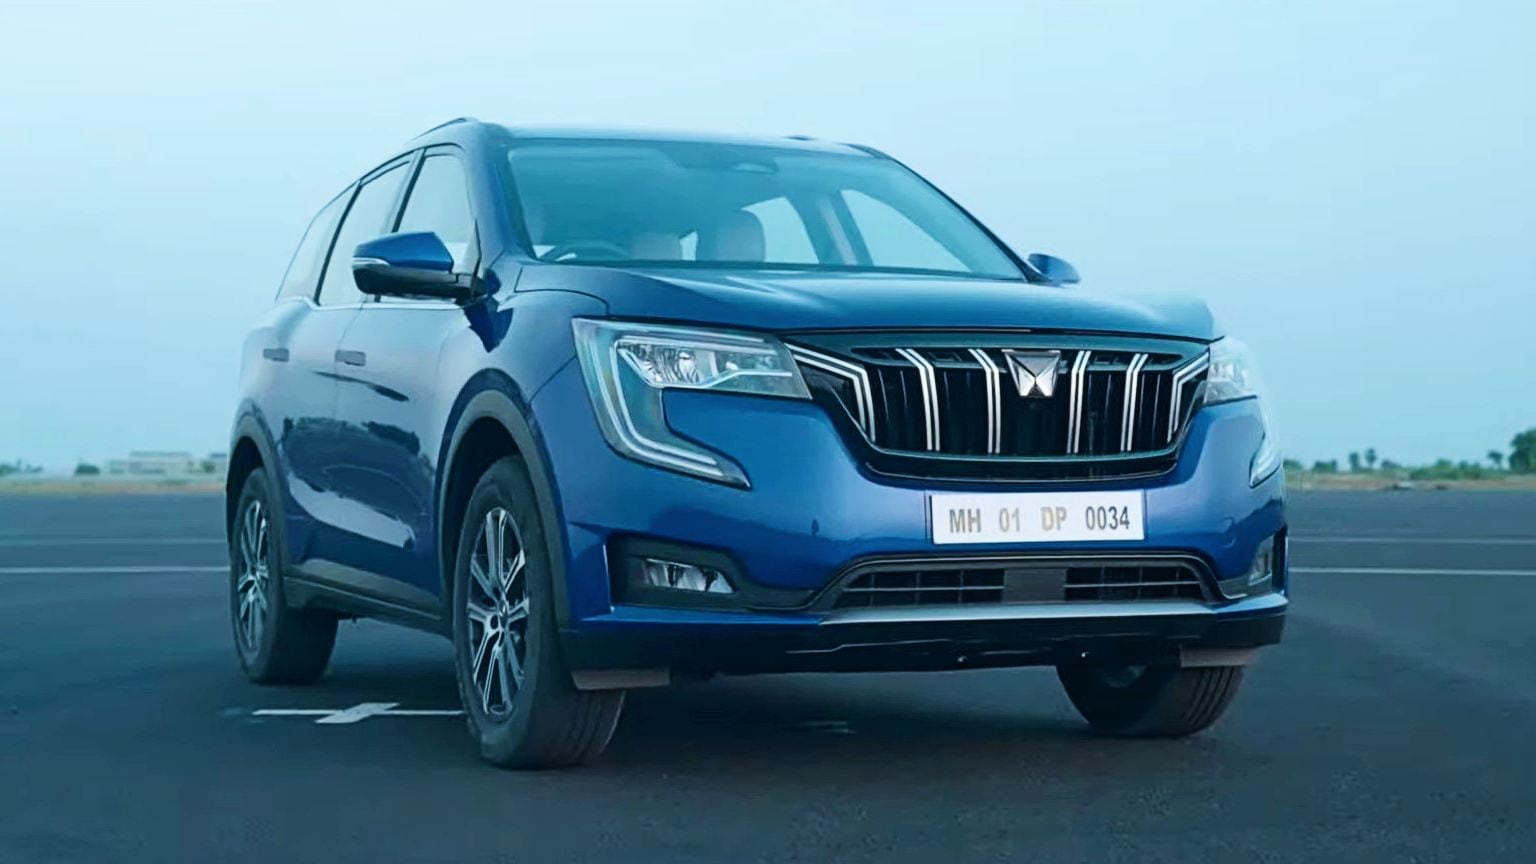 Mahindra XUV700 spied fully undisguised ahead of debut, feature details revealed- Technology News, Firstpost